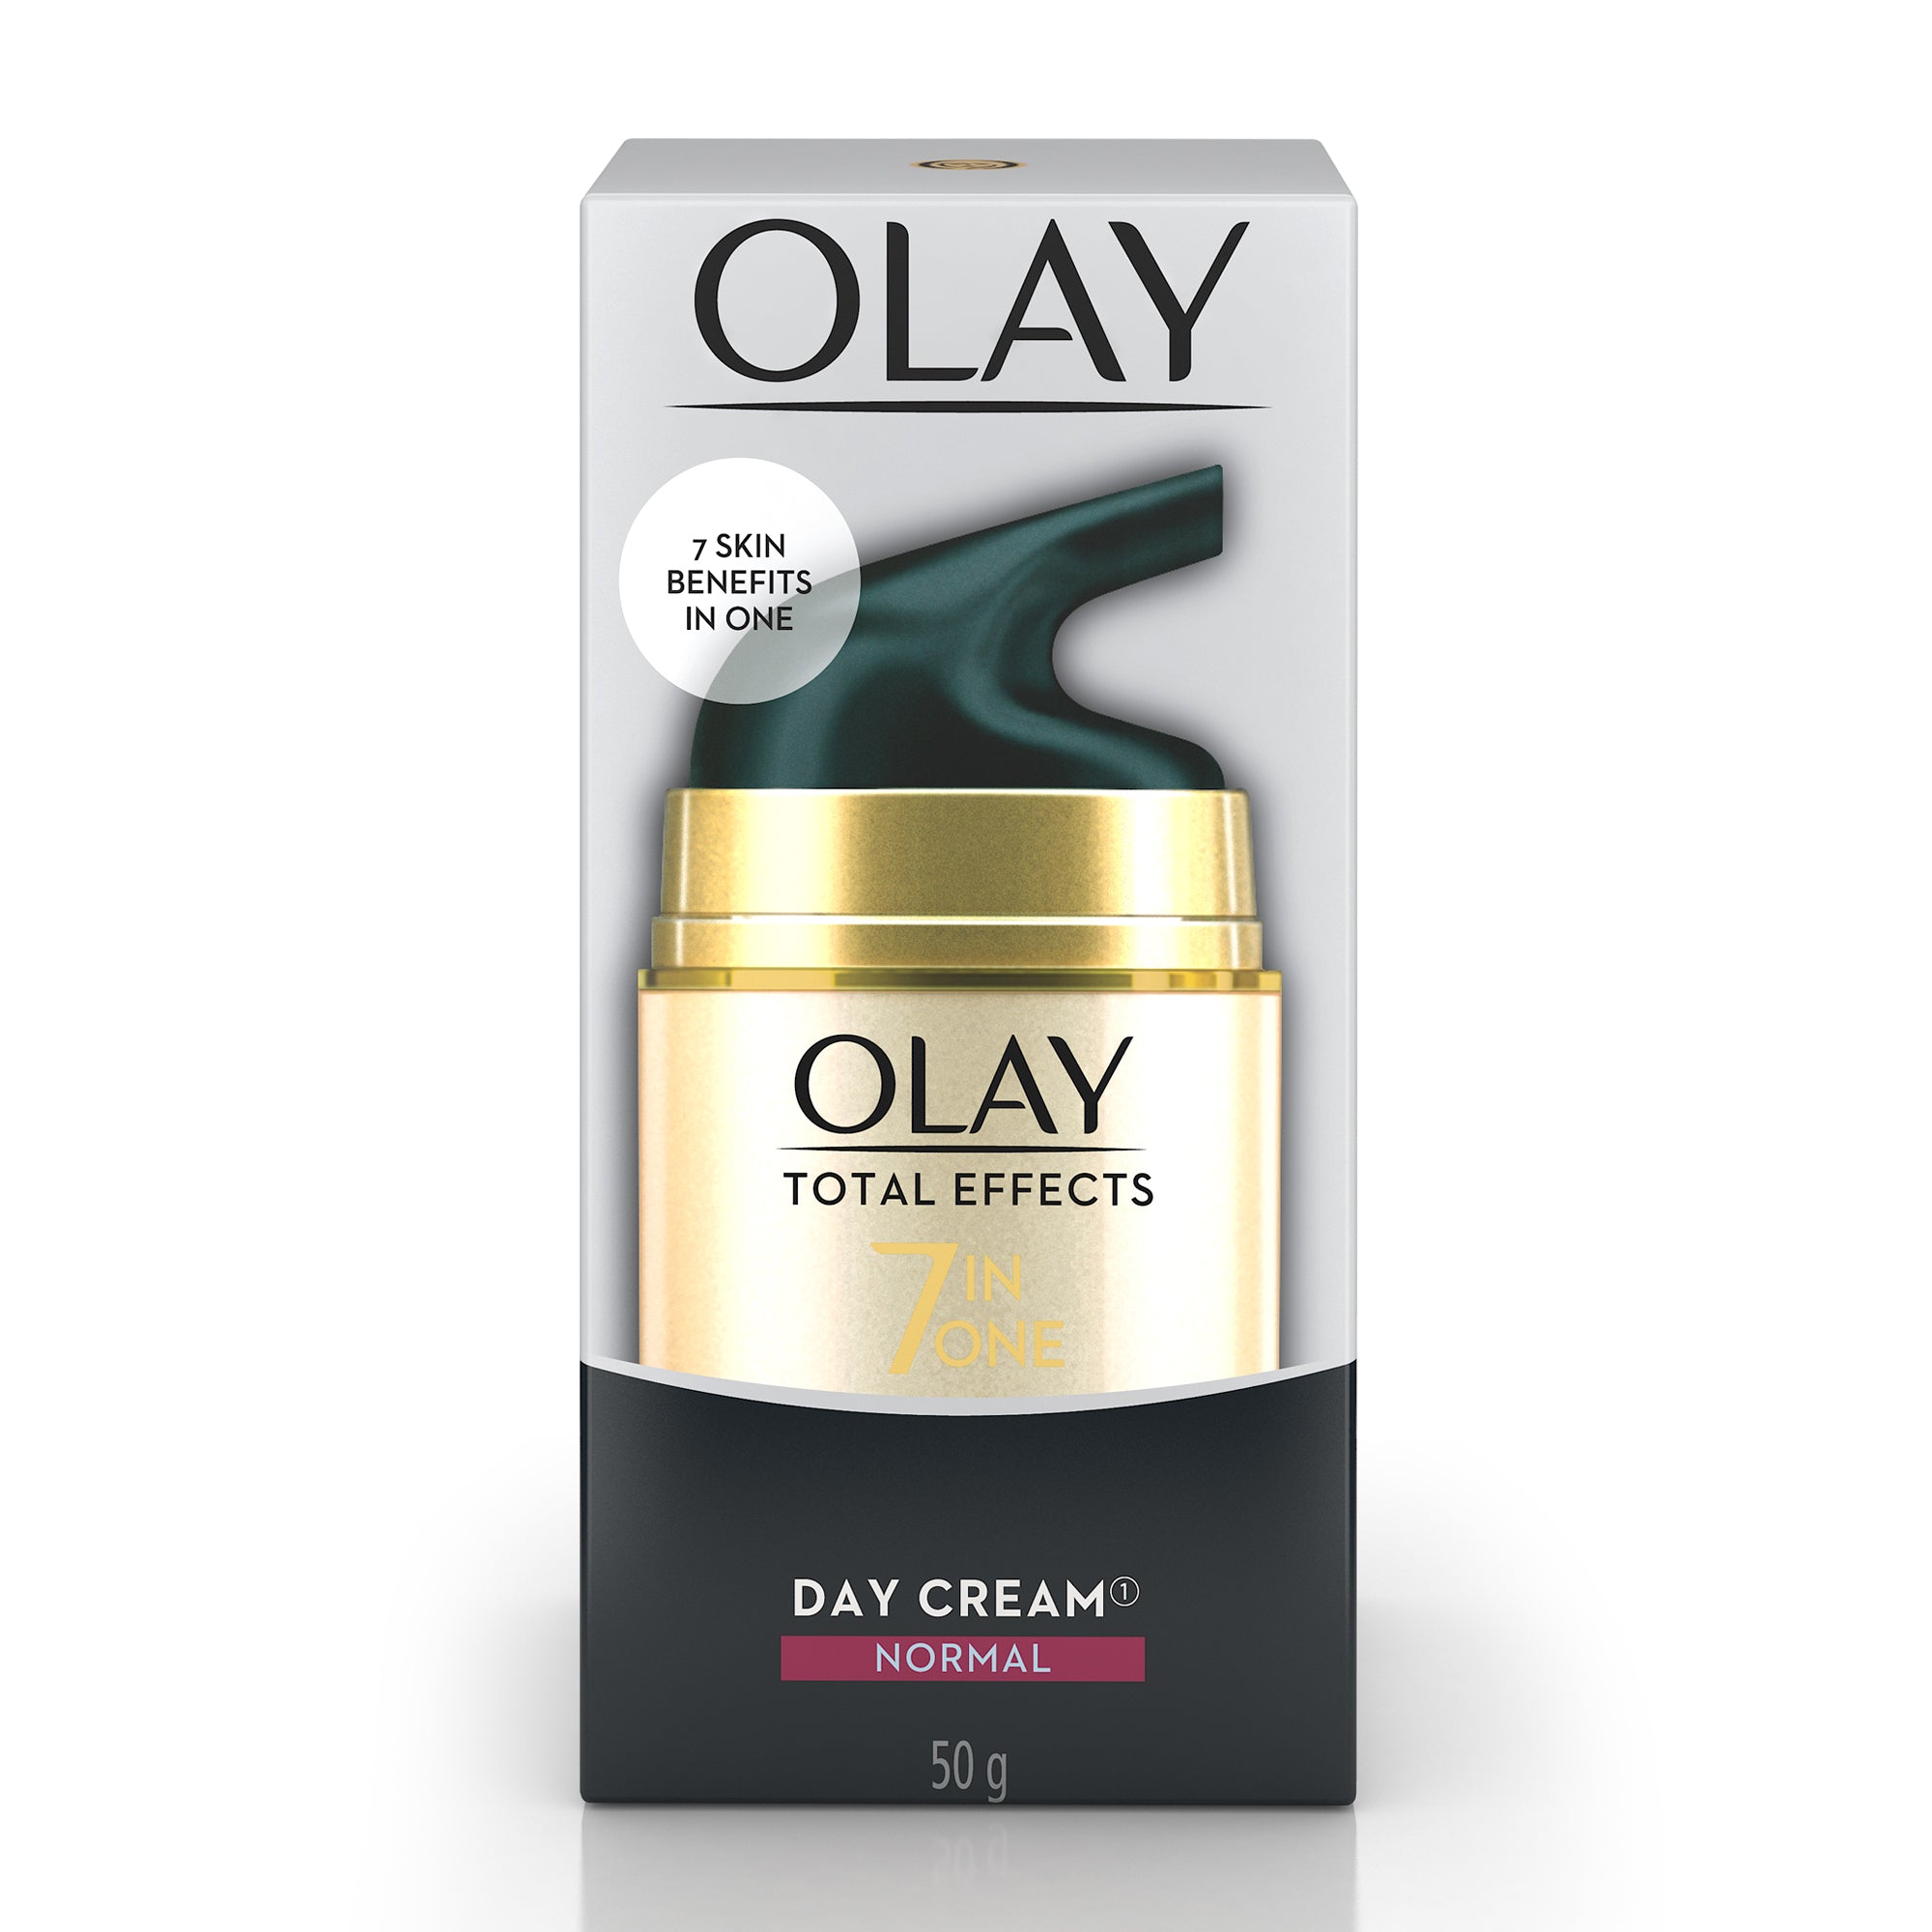 Olay Total Effects 7 In One Day Cream Normal (50g) Olay